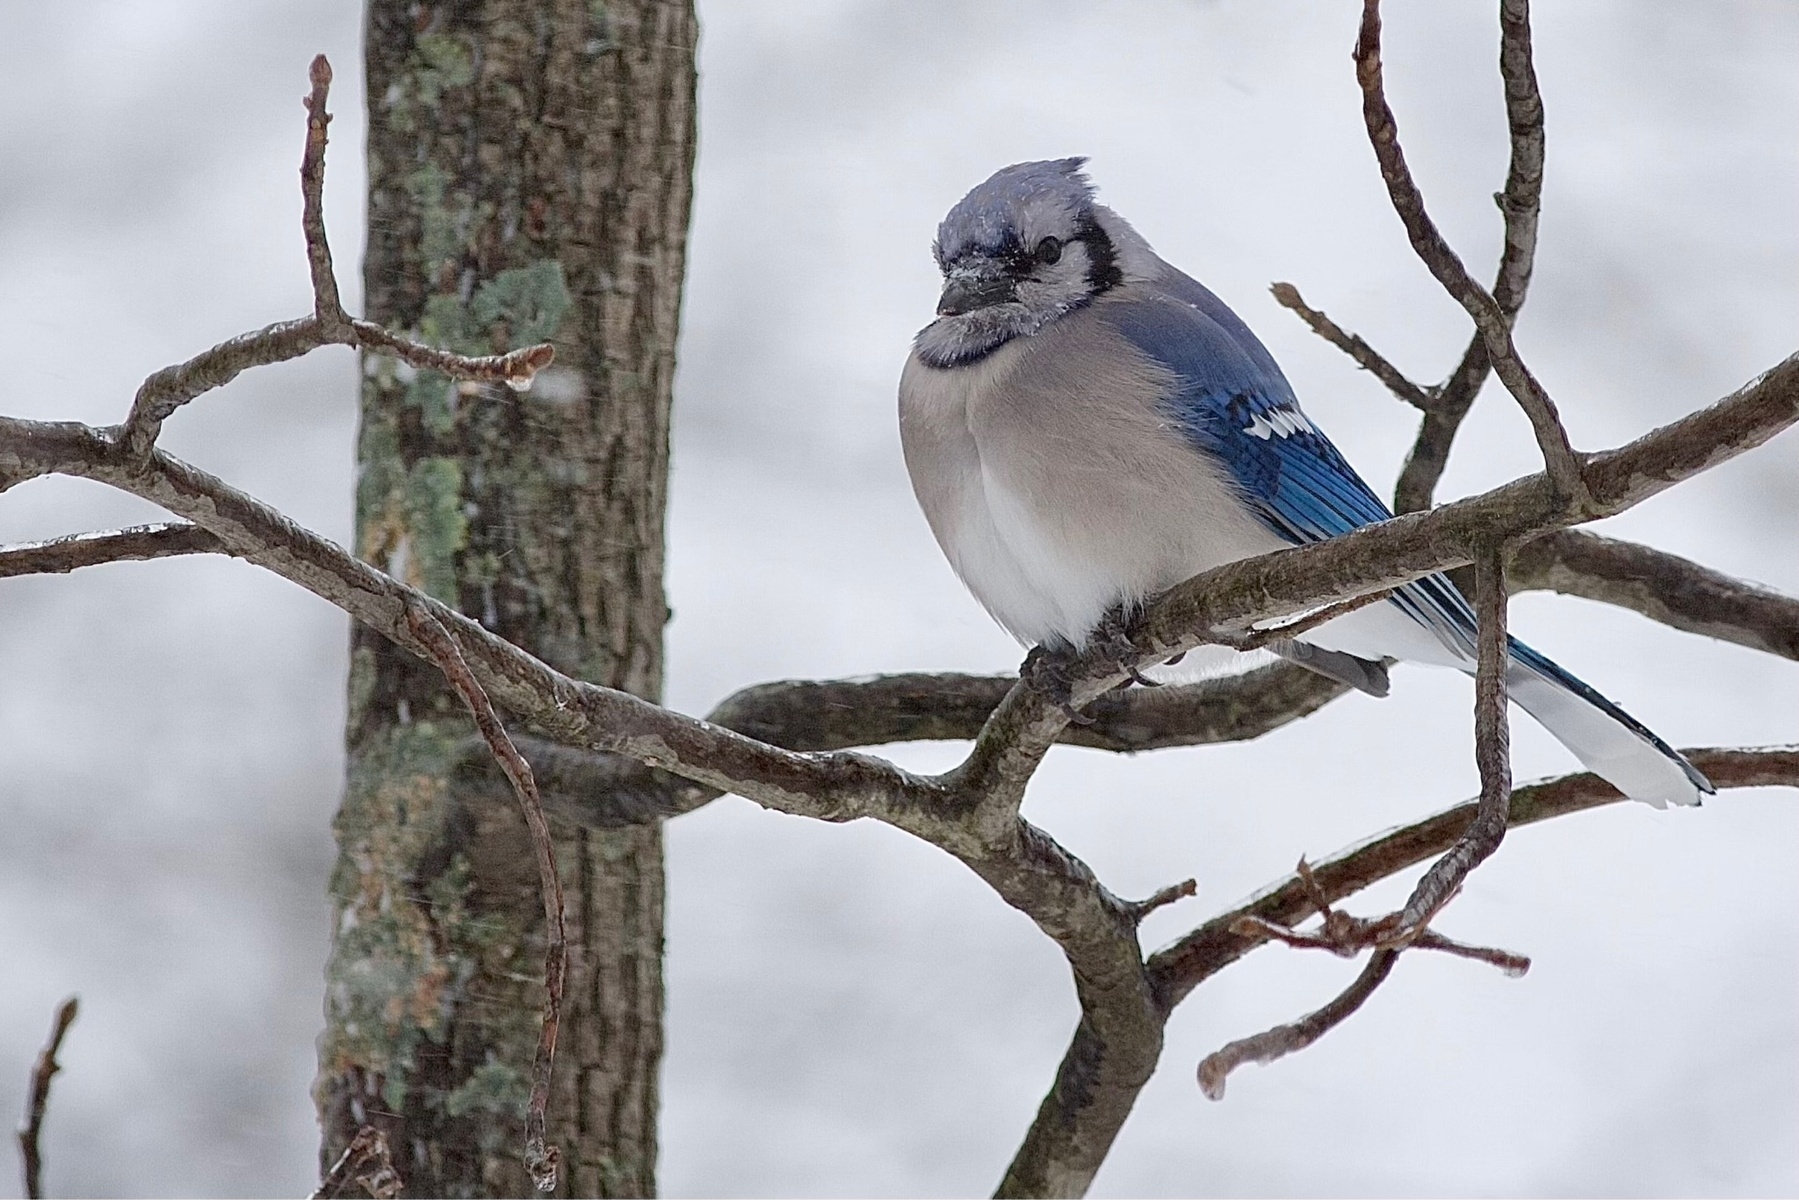 A medium sized bird is perched an a branch set against a blurred, snowy background. The bird is predominantly white/gray on the front side and bright blue on the backside with a black beak. There is also a thin black band that extends back from the eyes then downward and around the front of the bird froming what looks like a necklace.